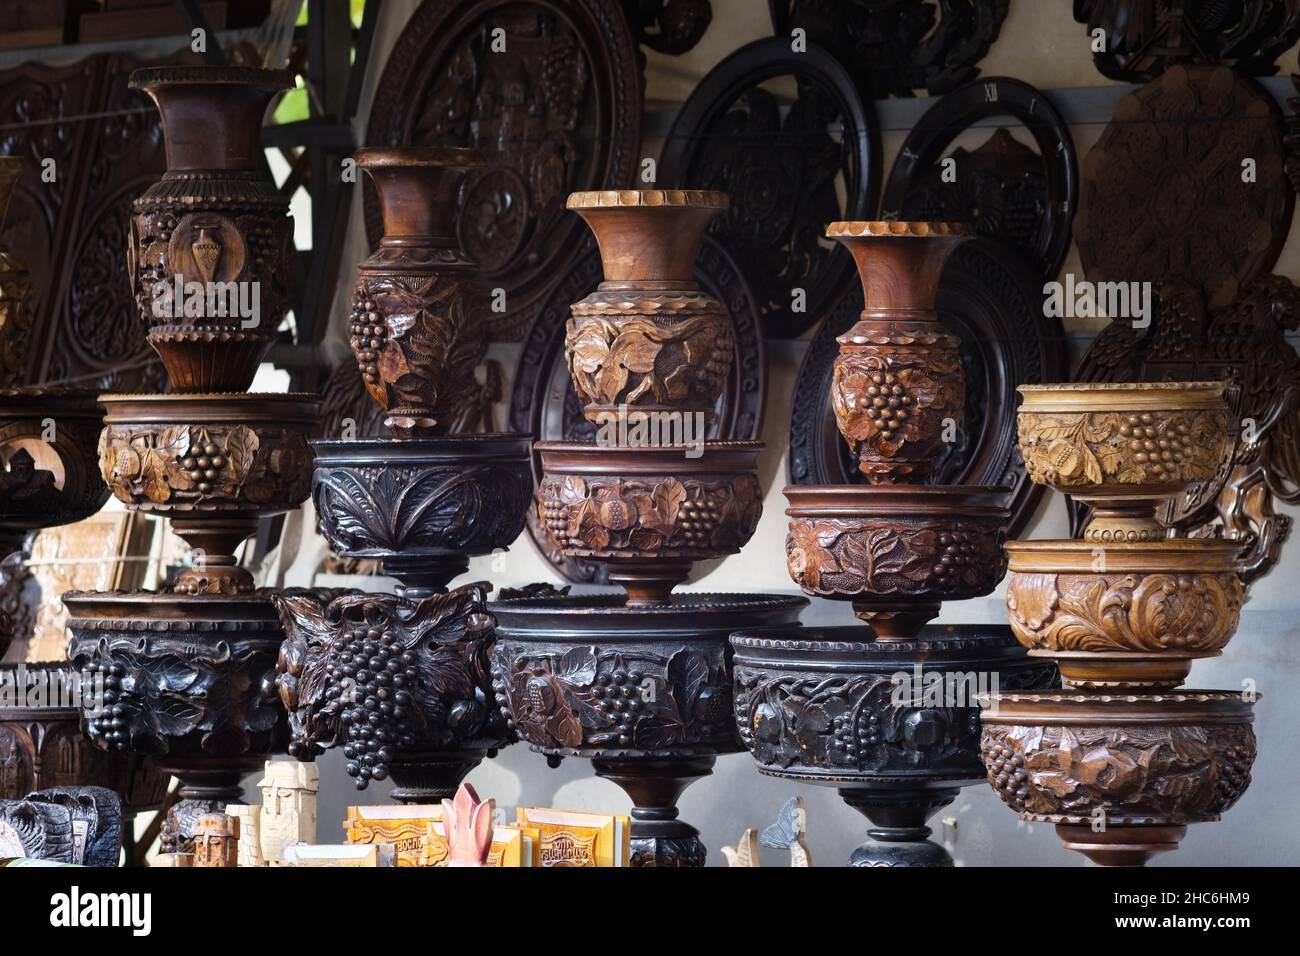 Wooden souvenir vases of different size and shape, with engravery of wine grapes and leaves and other ornaments Stock Photo